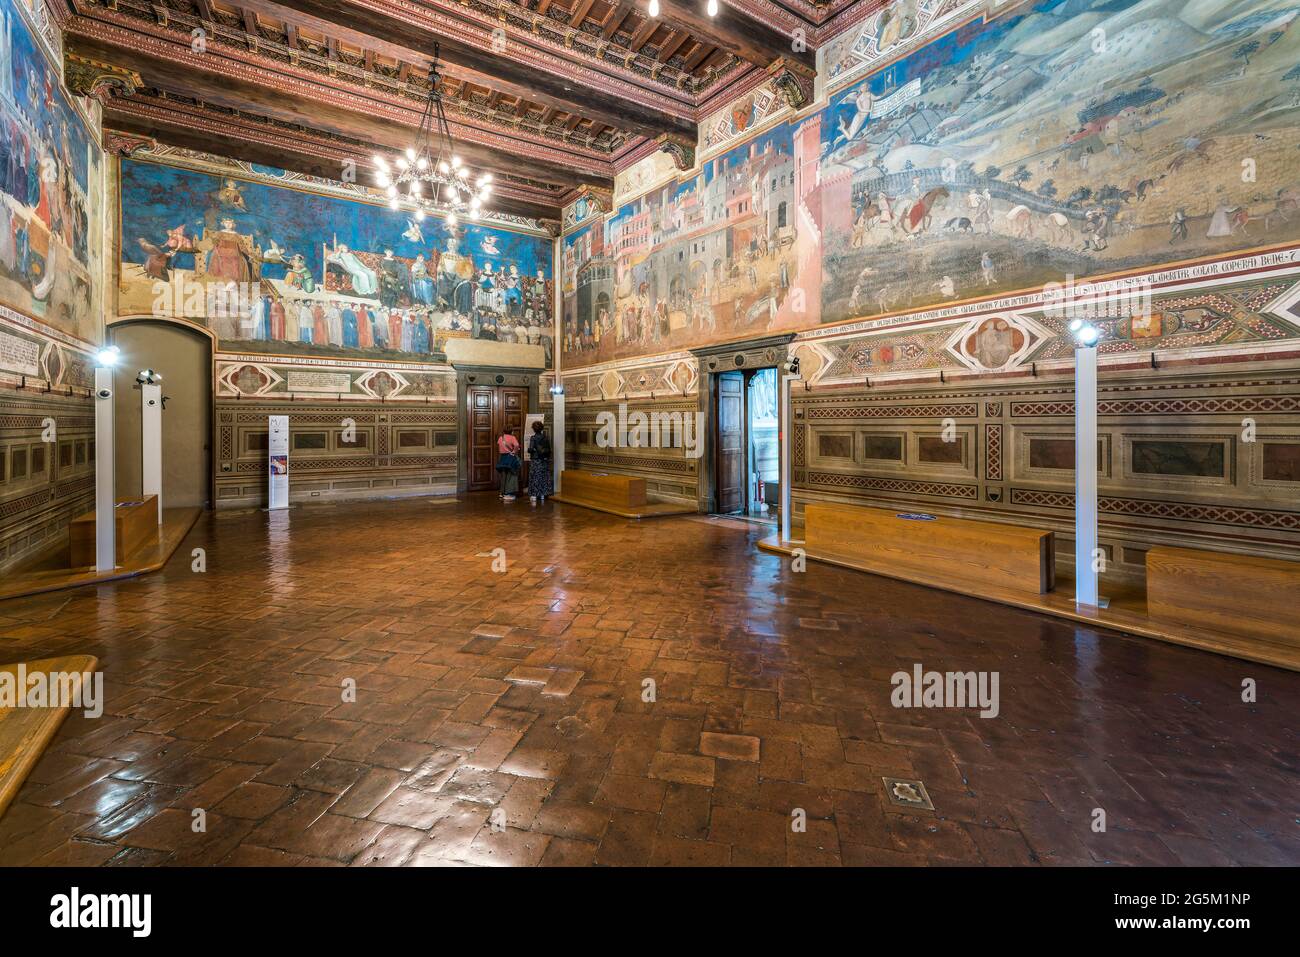 The Sala della Pace with the fresco cycle of the Good Government and the Bad Government, 1337-1339, painter Ambrogio Lorenzetti, Palazzo Pubblico, Sie Stock Photo